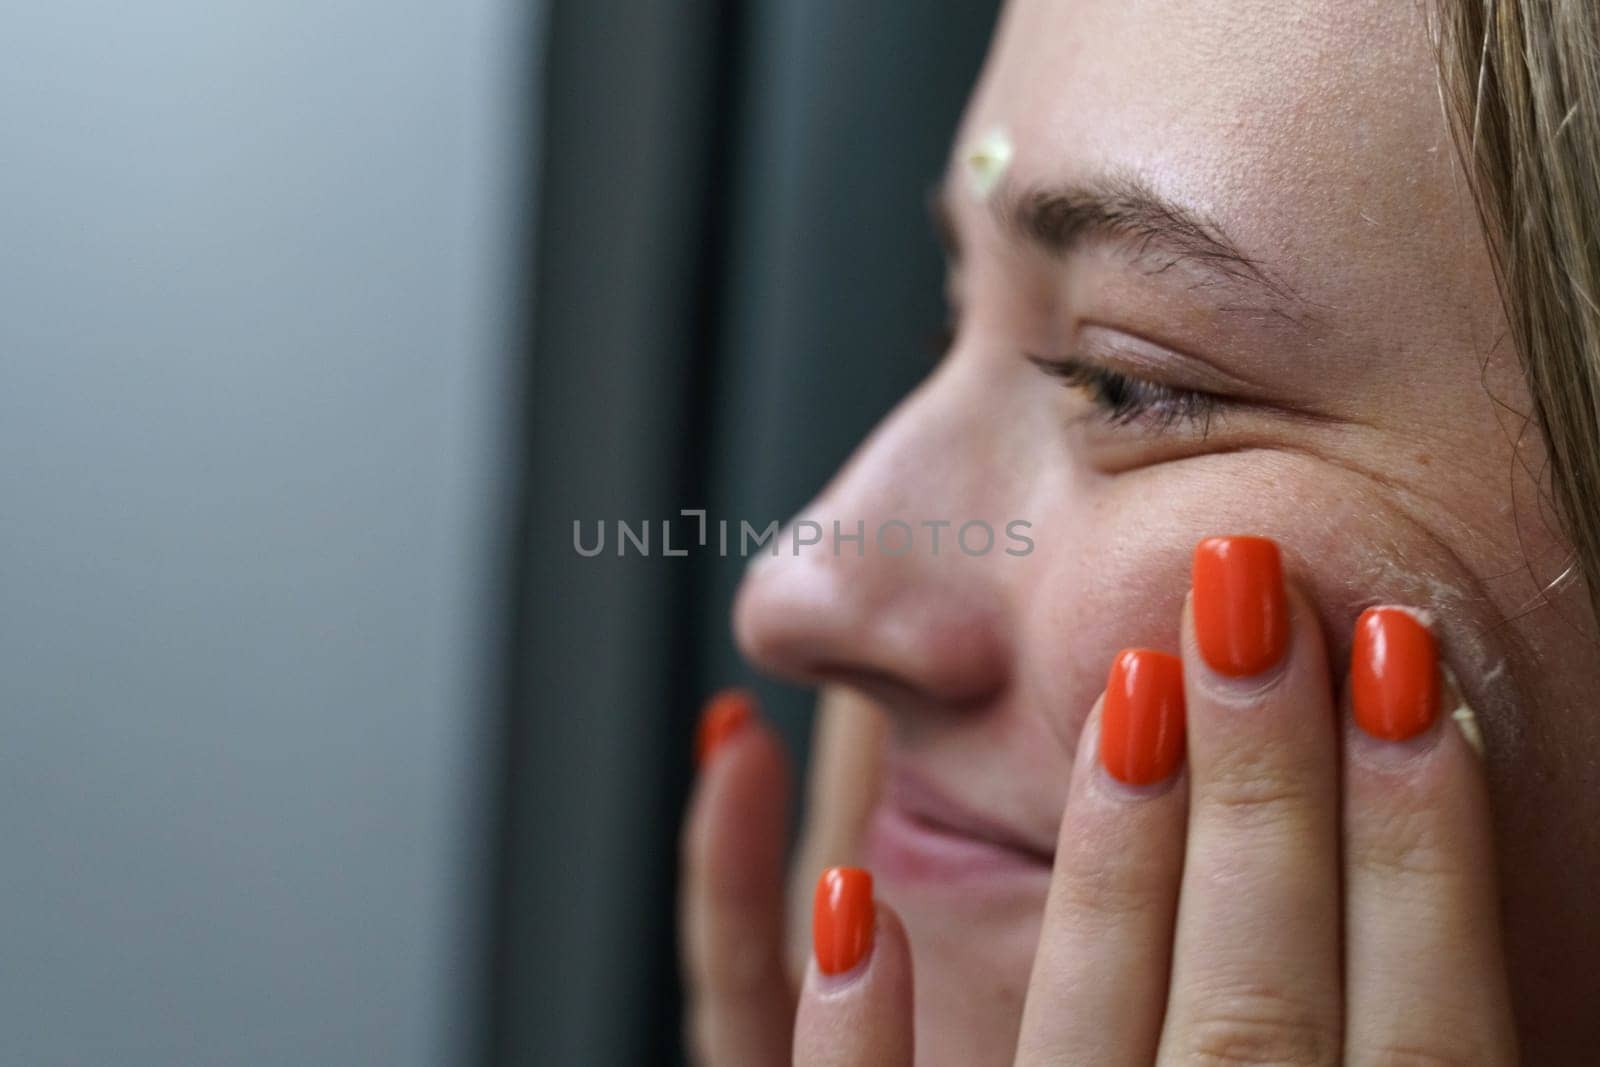 A young happy woman takes care of her face in the morning. Massages the face with hands, evenly distributing the cream over the skin. Image partially out of focus. Close-up